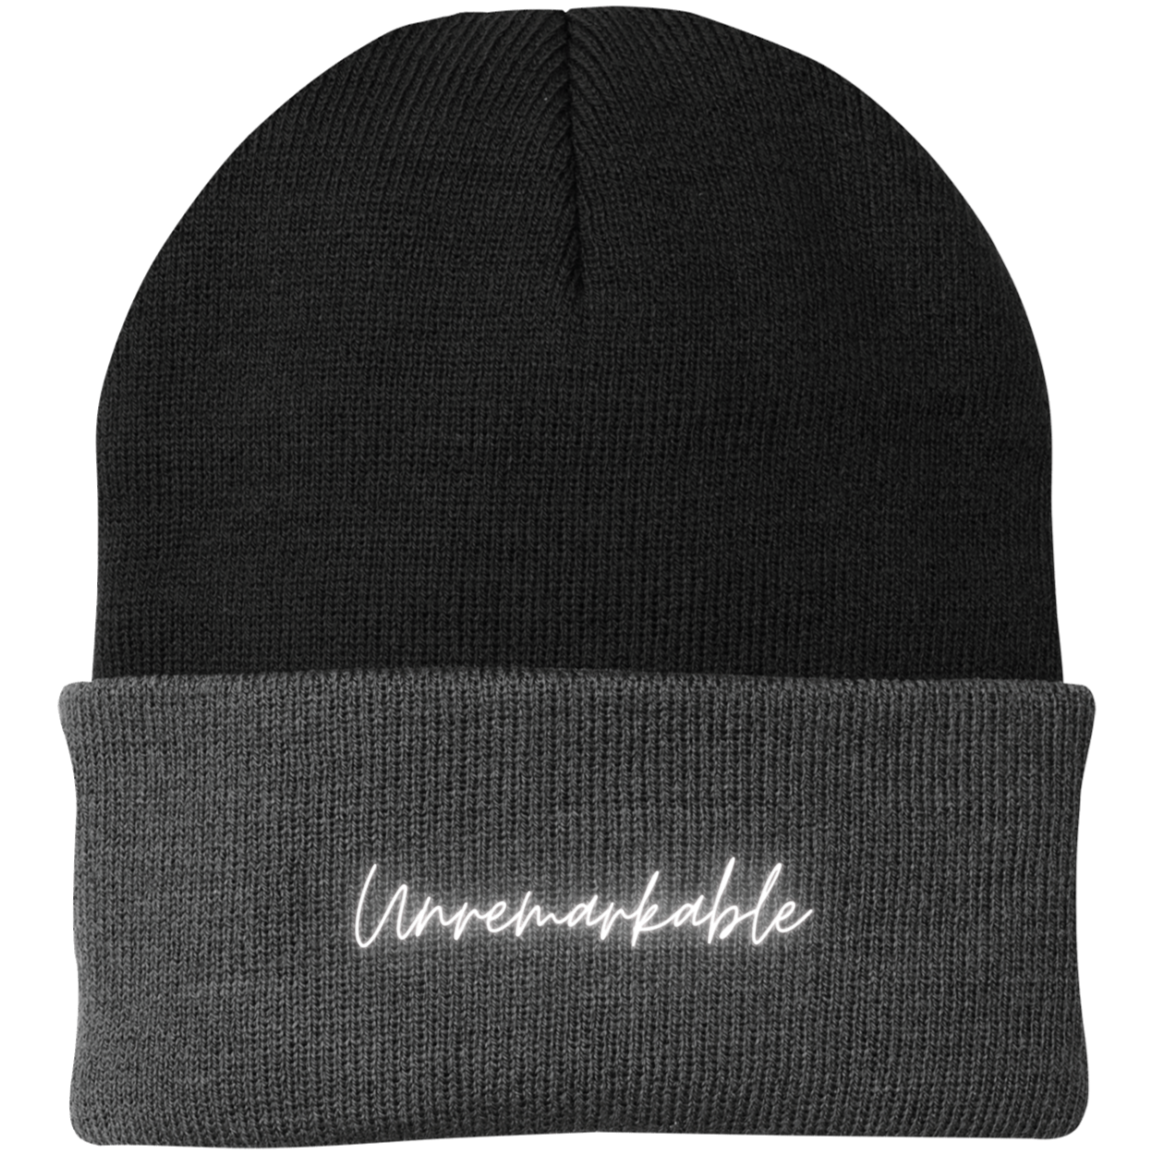 Unremarkable  Embroidered Knit Cap